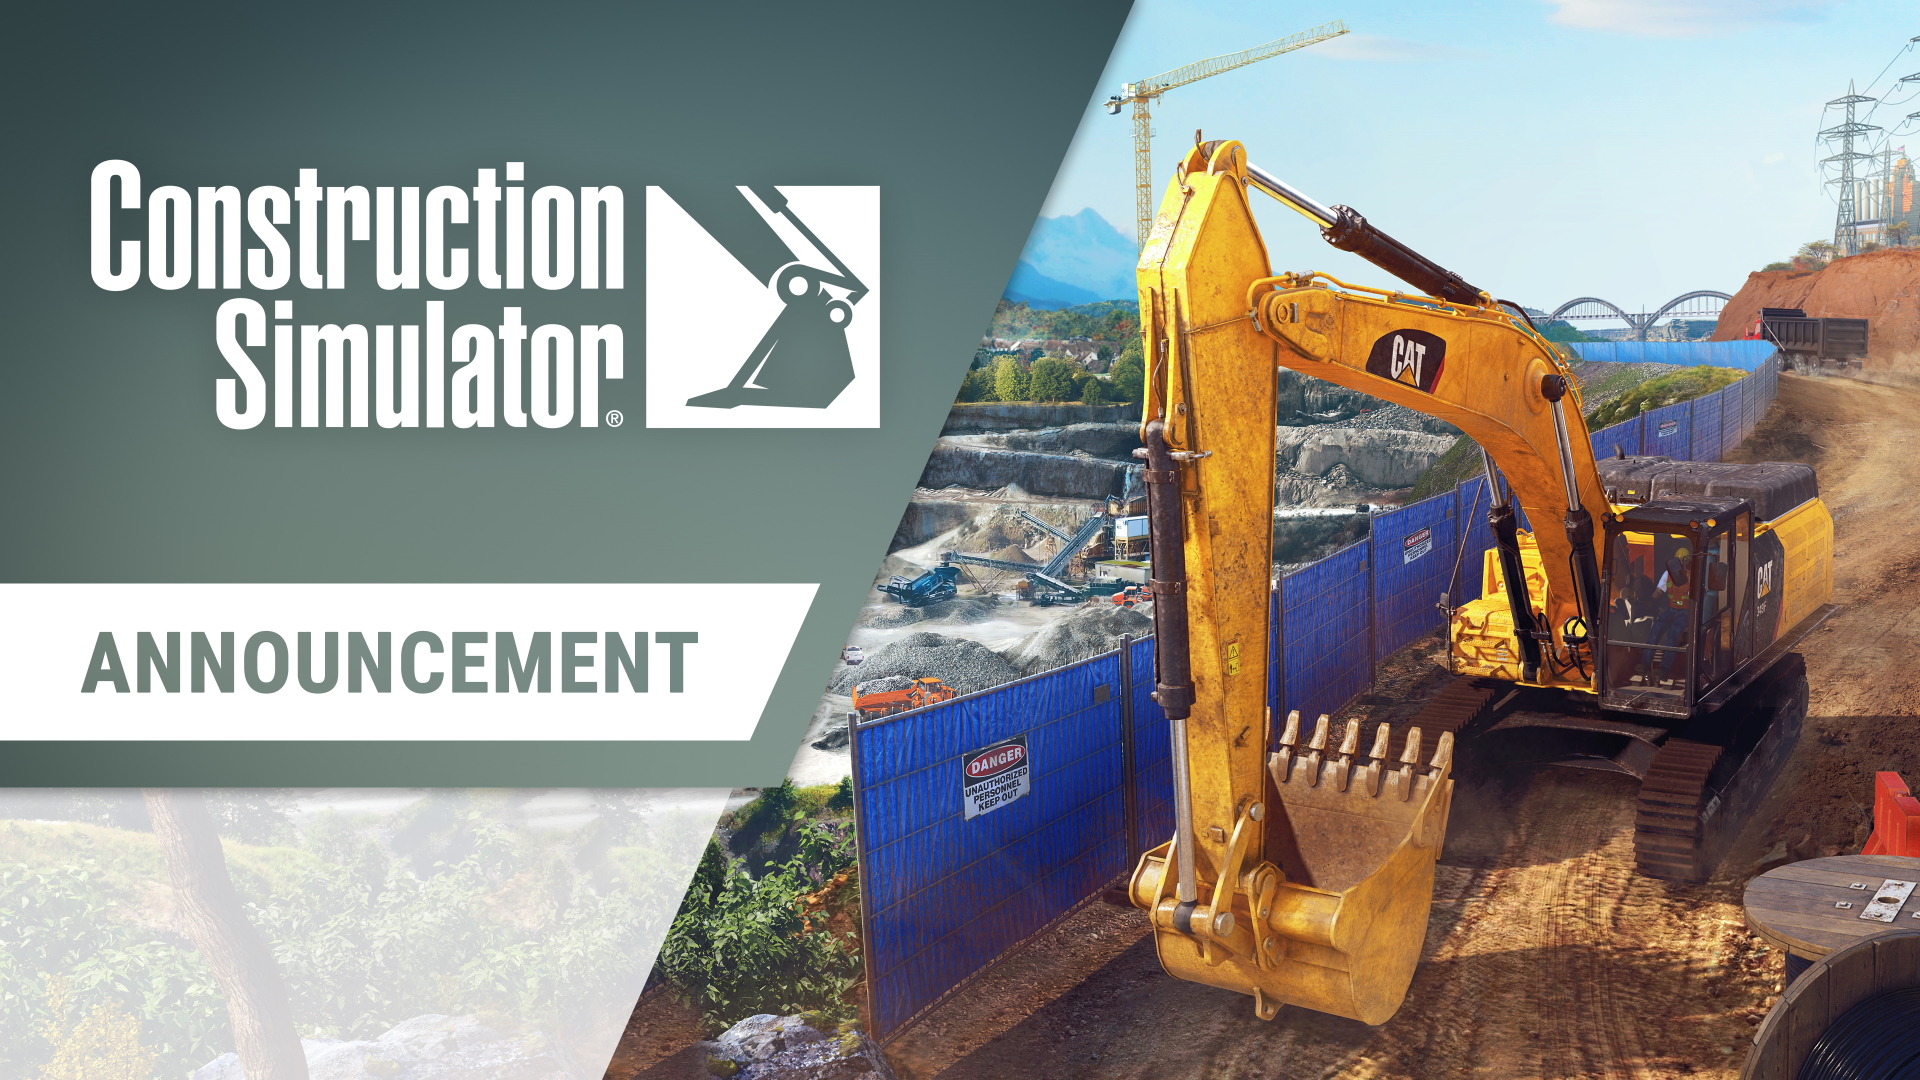 Construction Simulator: Long-awaited successor to the popular Construction  Simulator series is coming to PC and consoles!